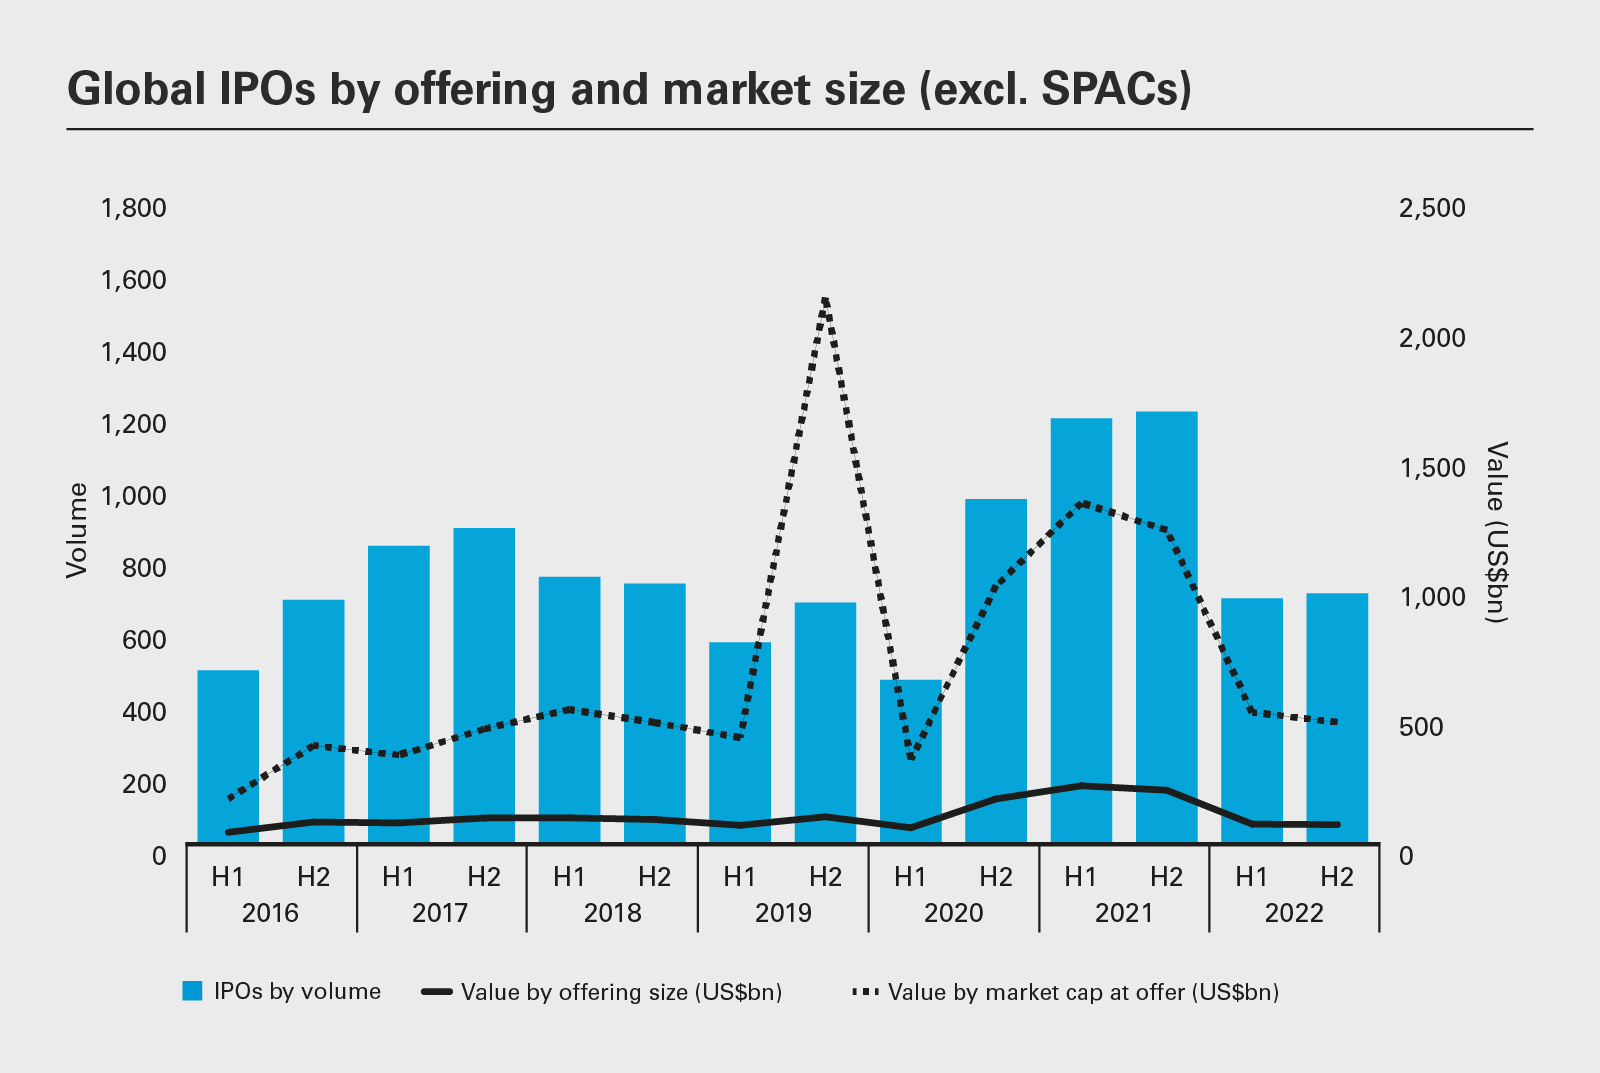 Global IPOS by offering and market size (excl. SPACs)